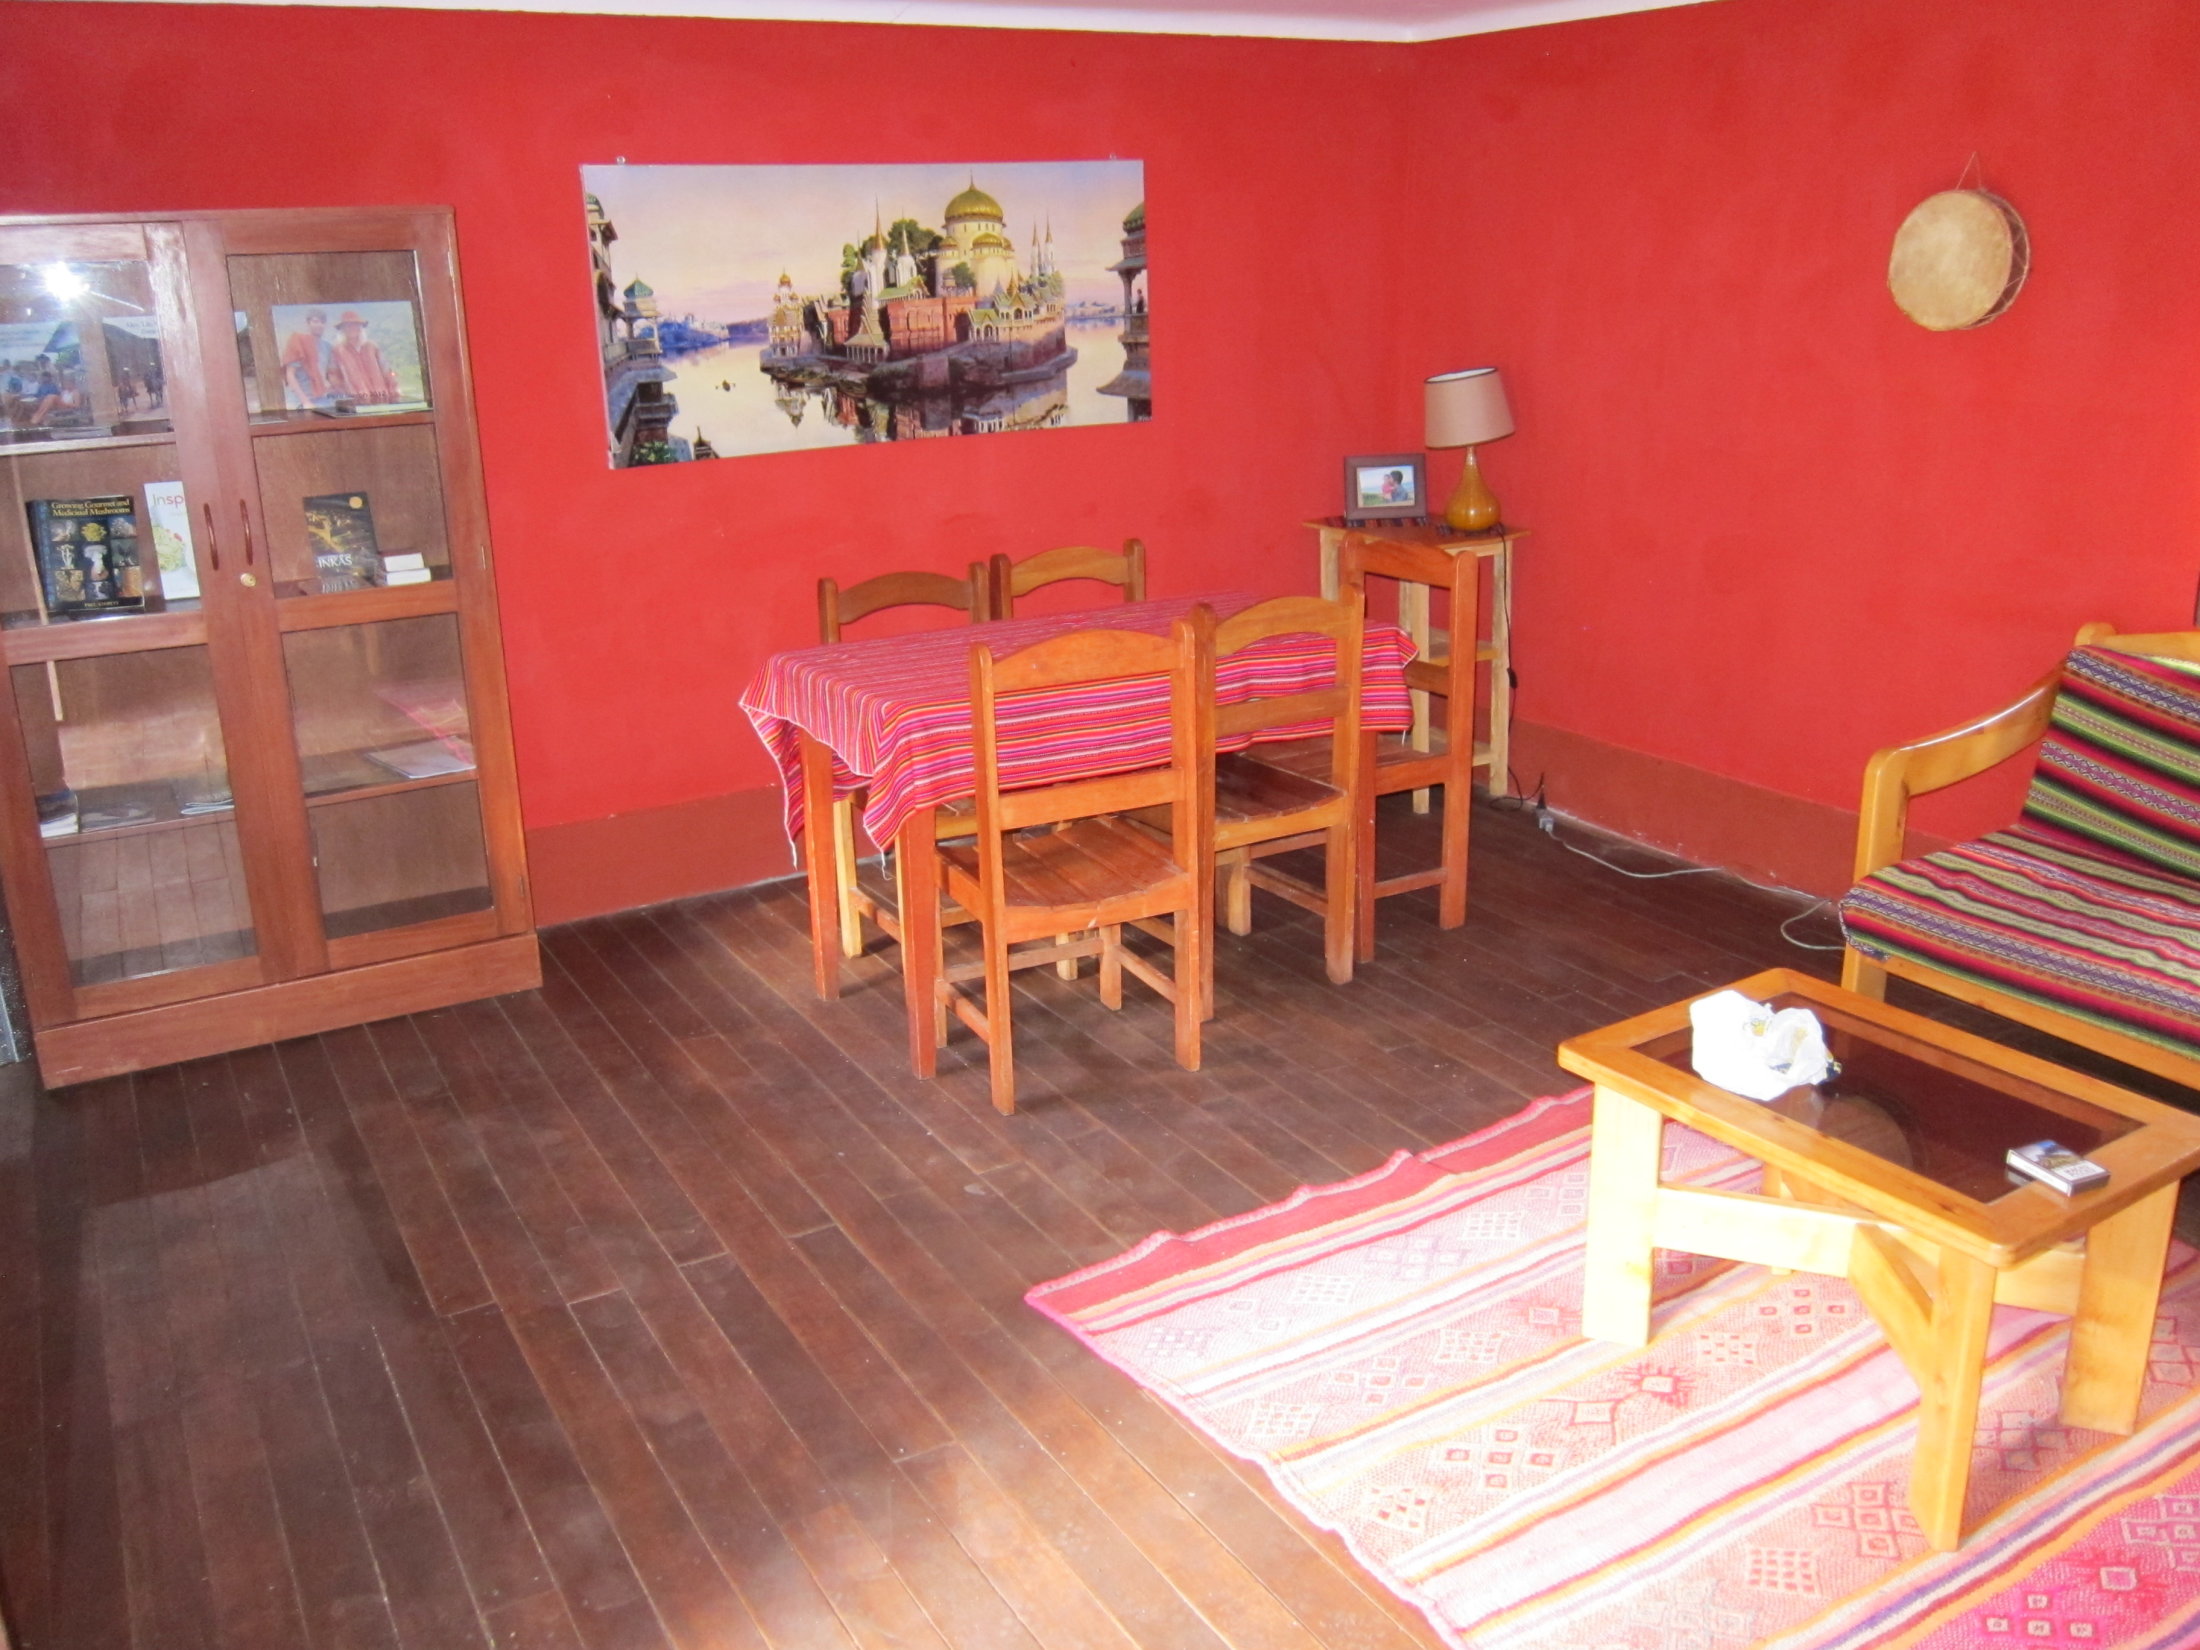 Living room of our Sacred Valley house